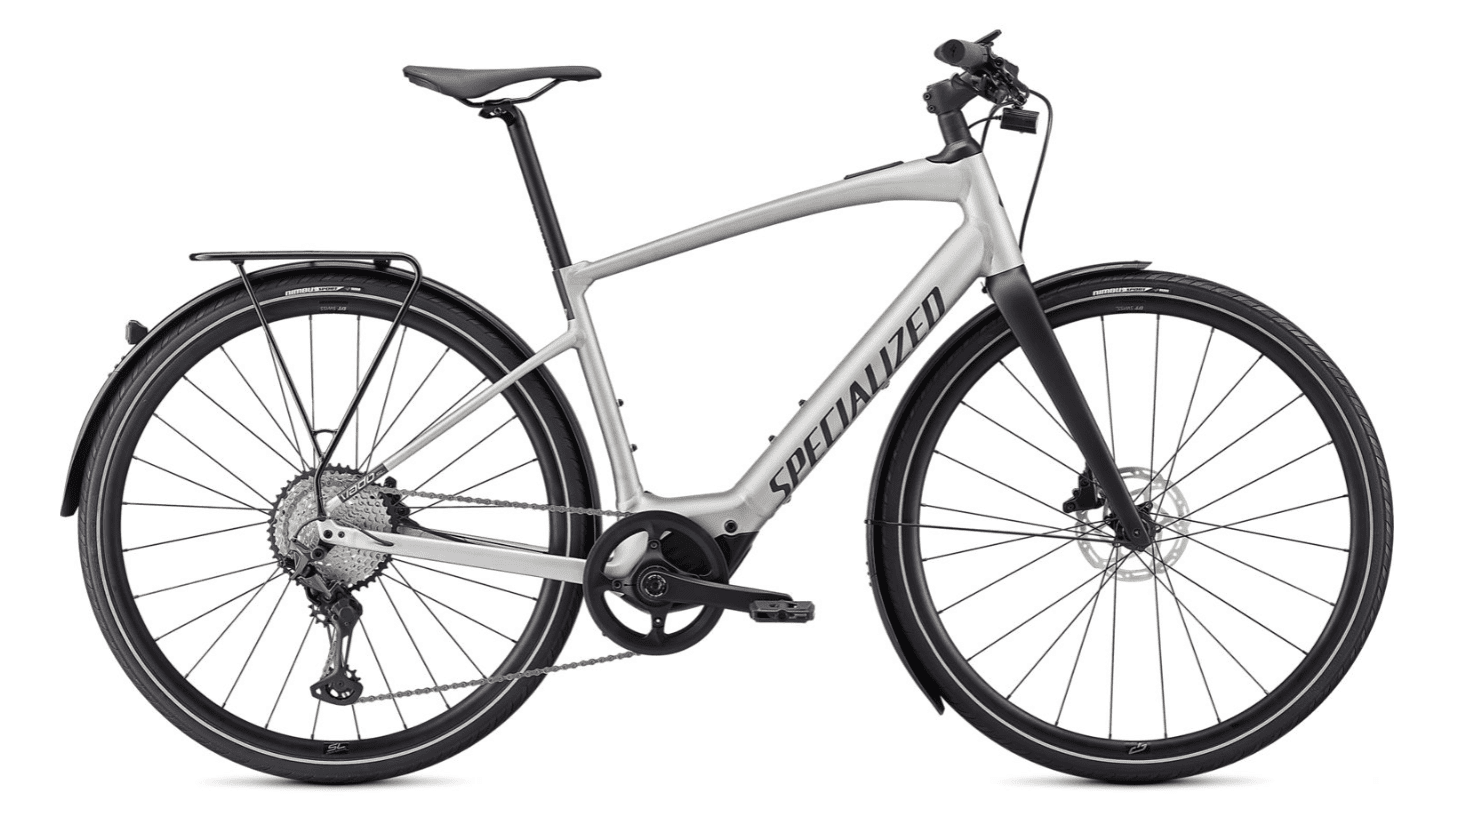 Specialized Turbo Vado SL 5.0 EQ 2021 Frontansicht in der Farbe Brushed Aluminum / Black Reflective